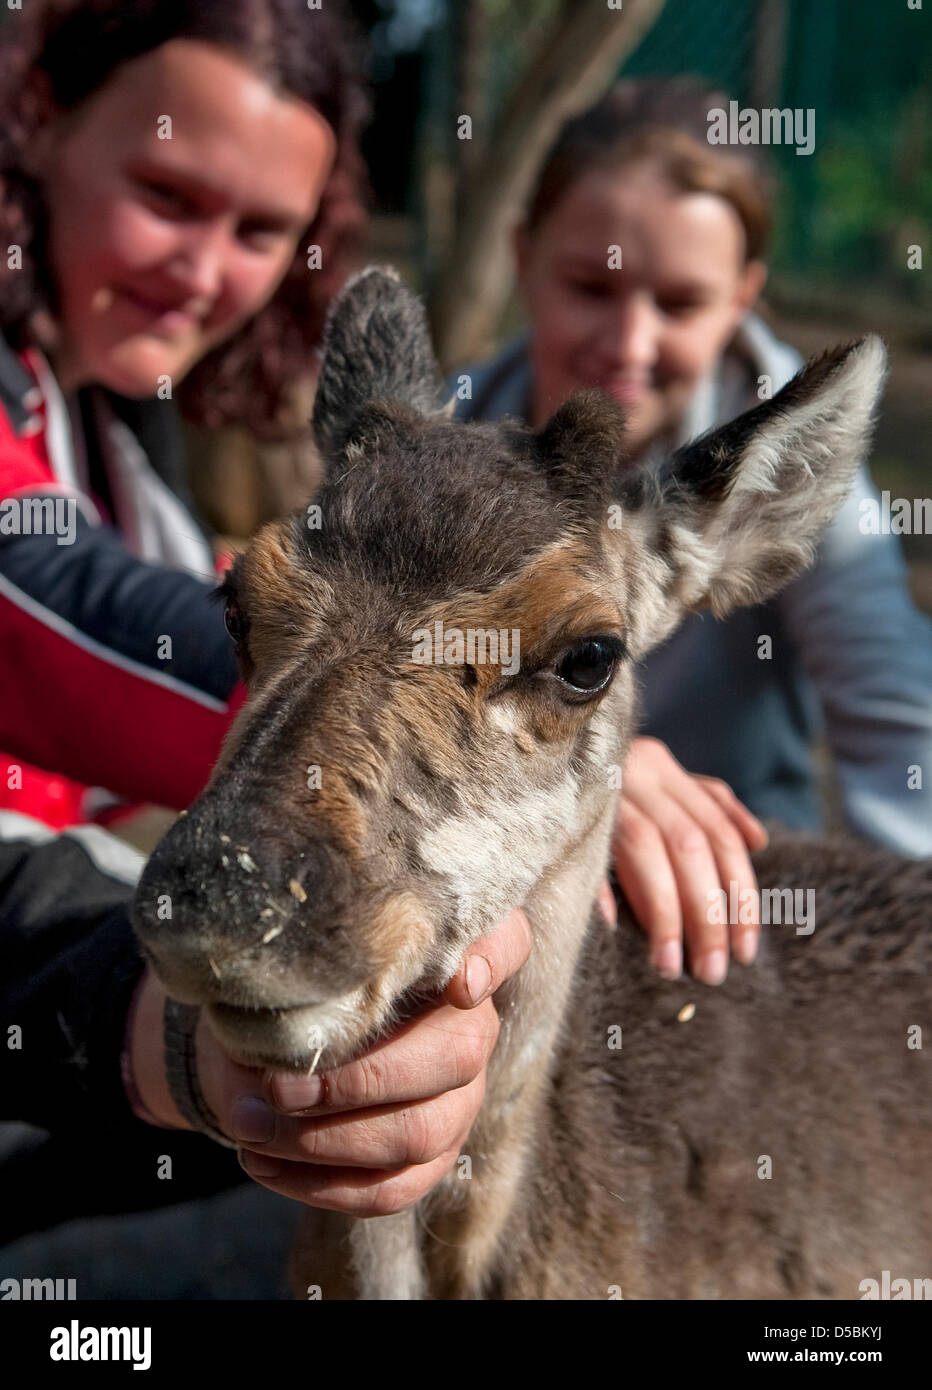 Zoo staff pet a reindeer calf in Halle, Germany, 09 September 2010. The three months old reindeer calf was named Lumi, which is finnish for snow. Its parents Finni and Rudolph are part of a flock of five animals and attend the annual christmas market of the city. Photo: Hendrik Schmidt Stock Photo